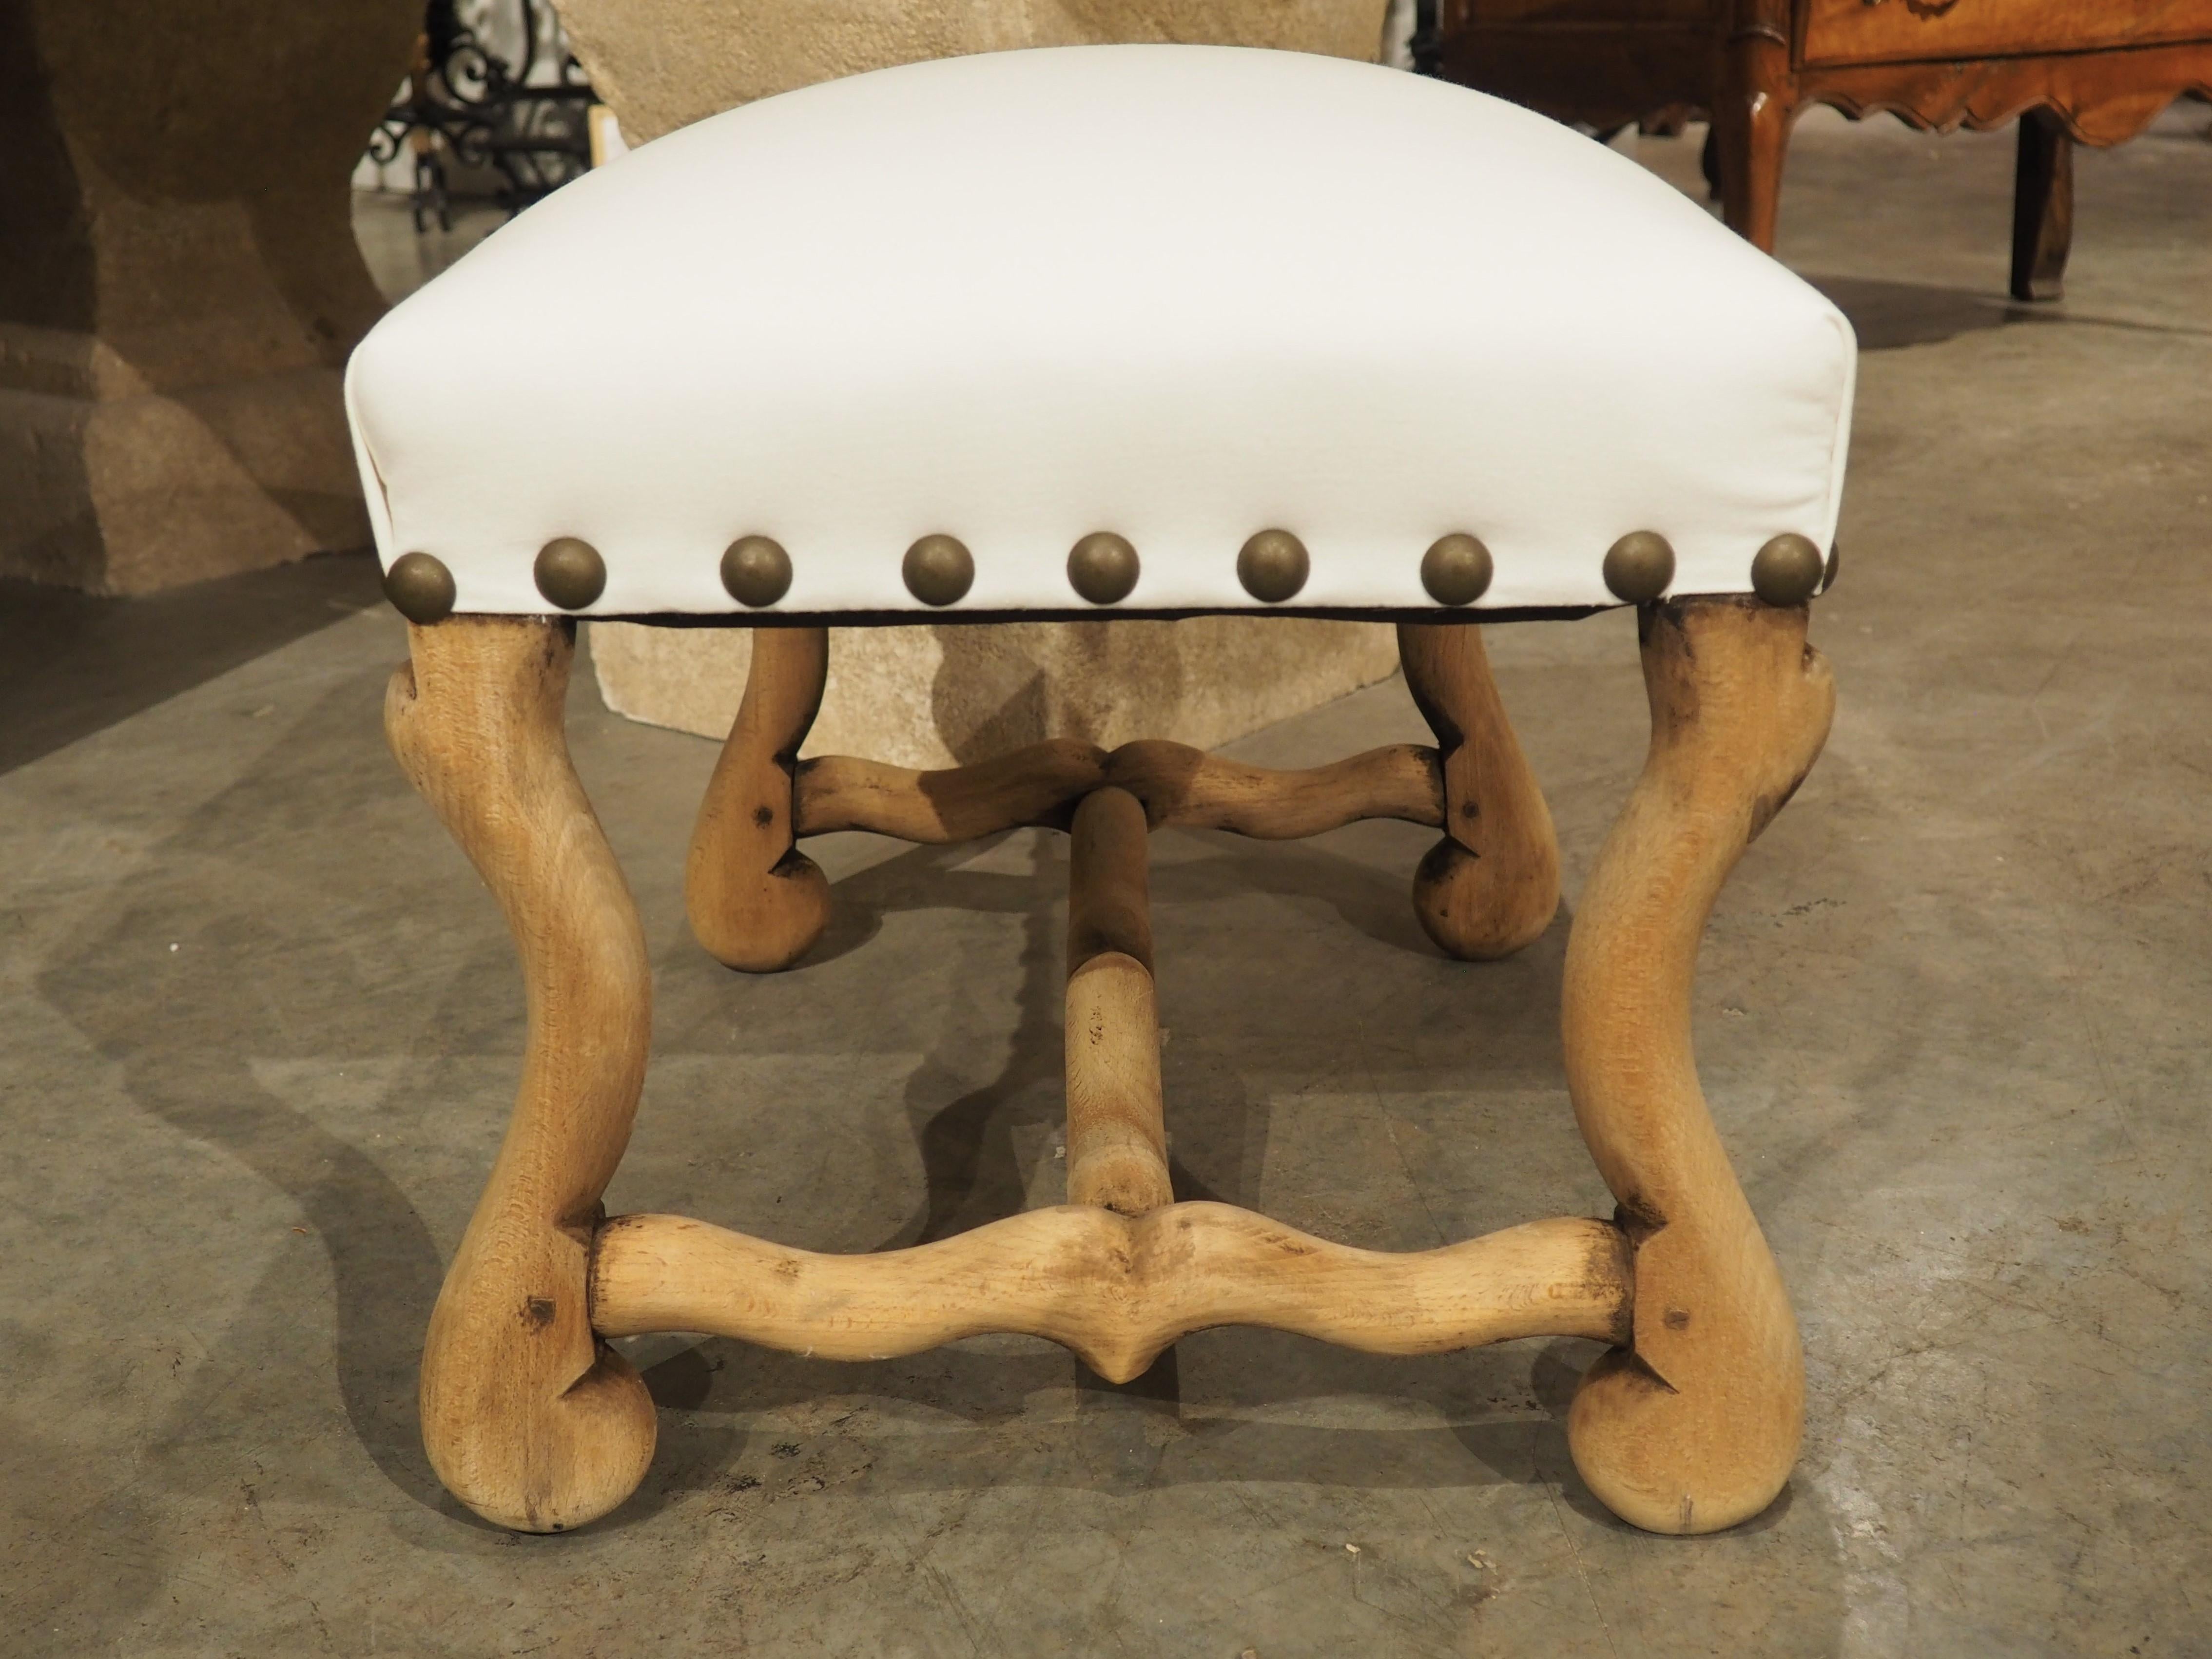 Bleached French Os De Mouton Tabouret Stool, White Cotton Upholstery, C. 1900 In Good Condition For Sale In Dallas, TX